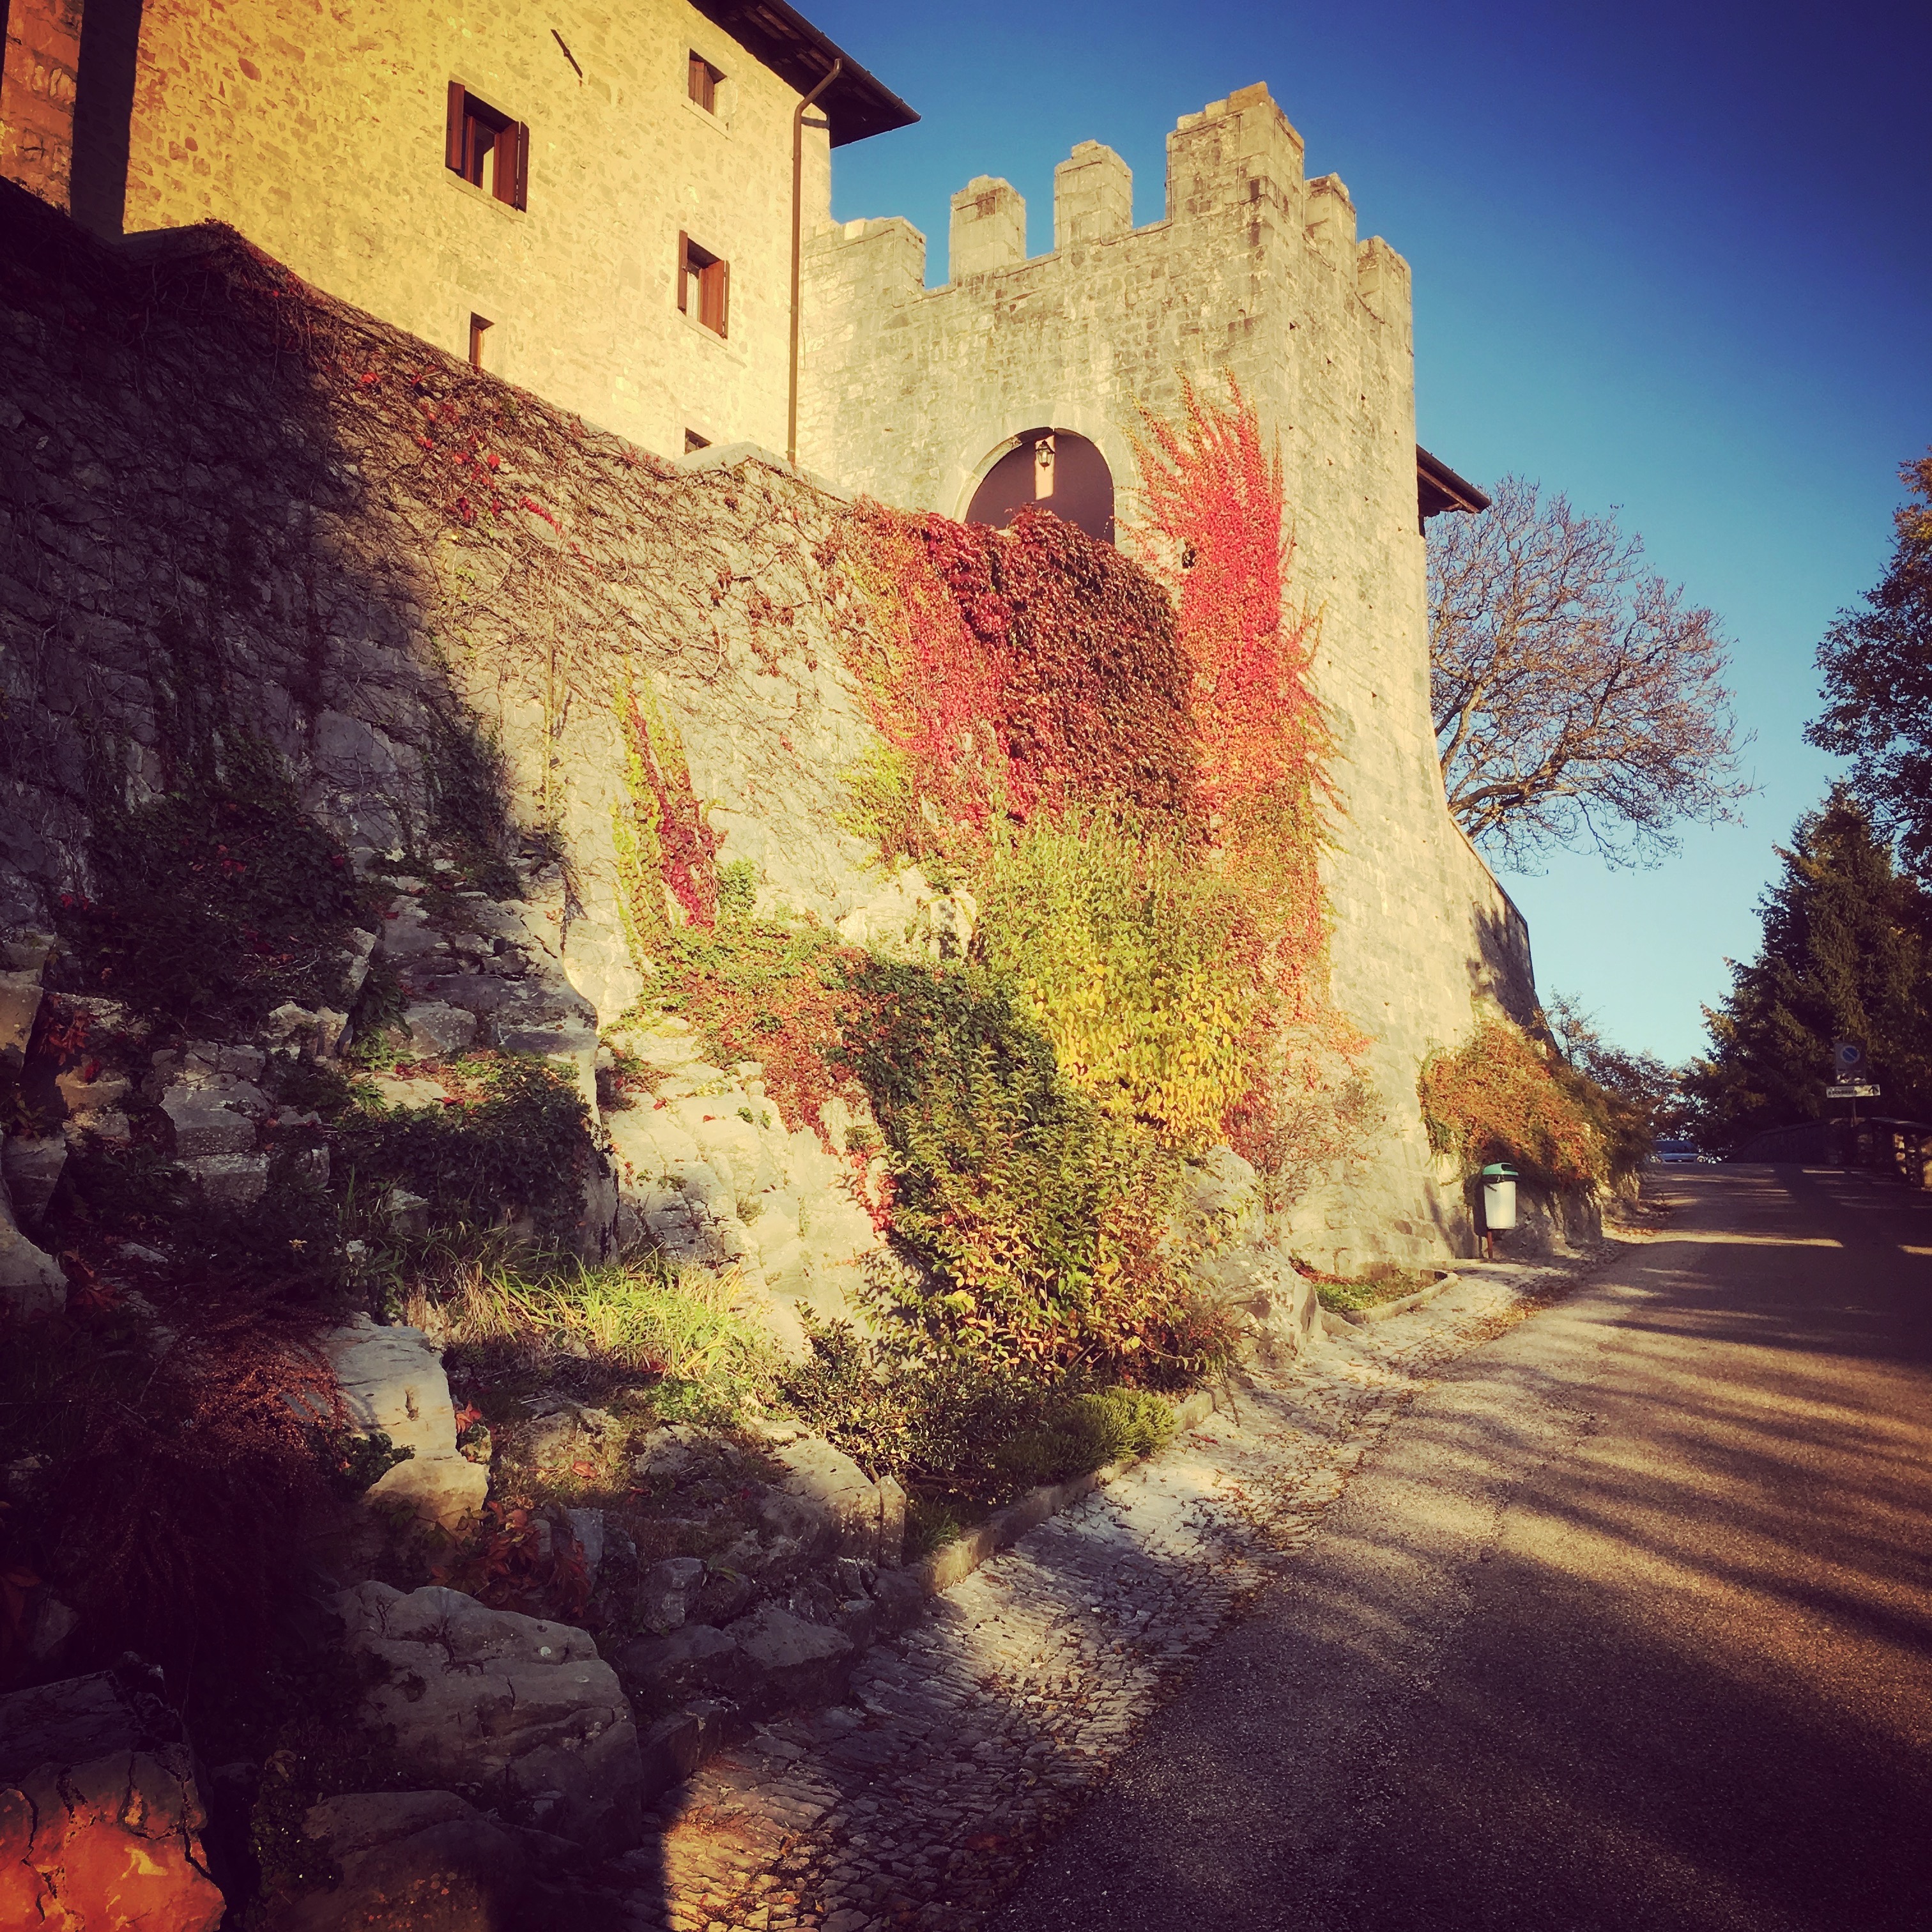 image of part of the walls of Castelmonte sanctuary taken in october 2016 with ivy turning red